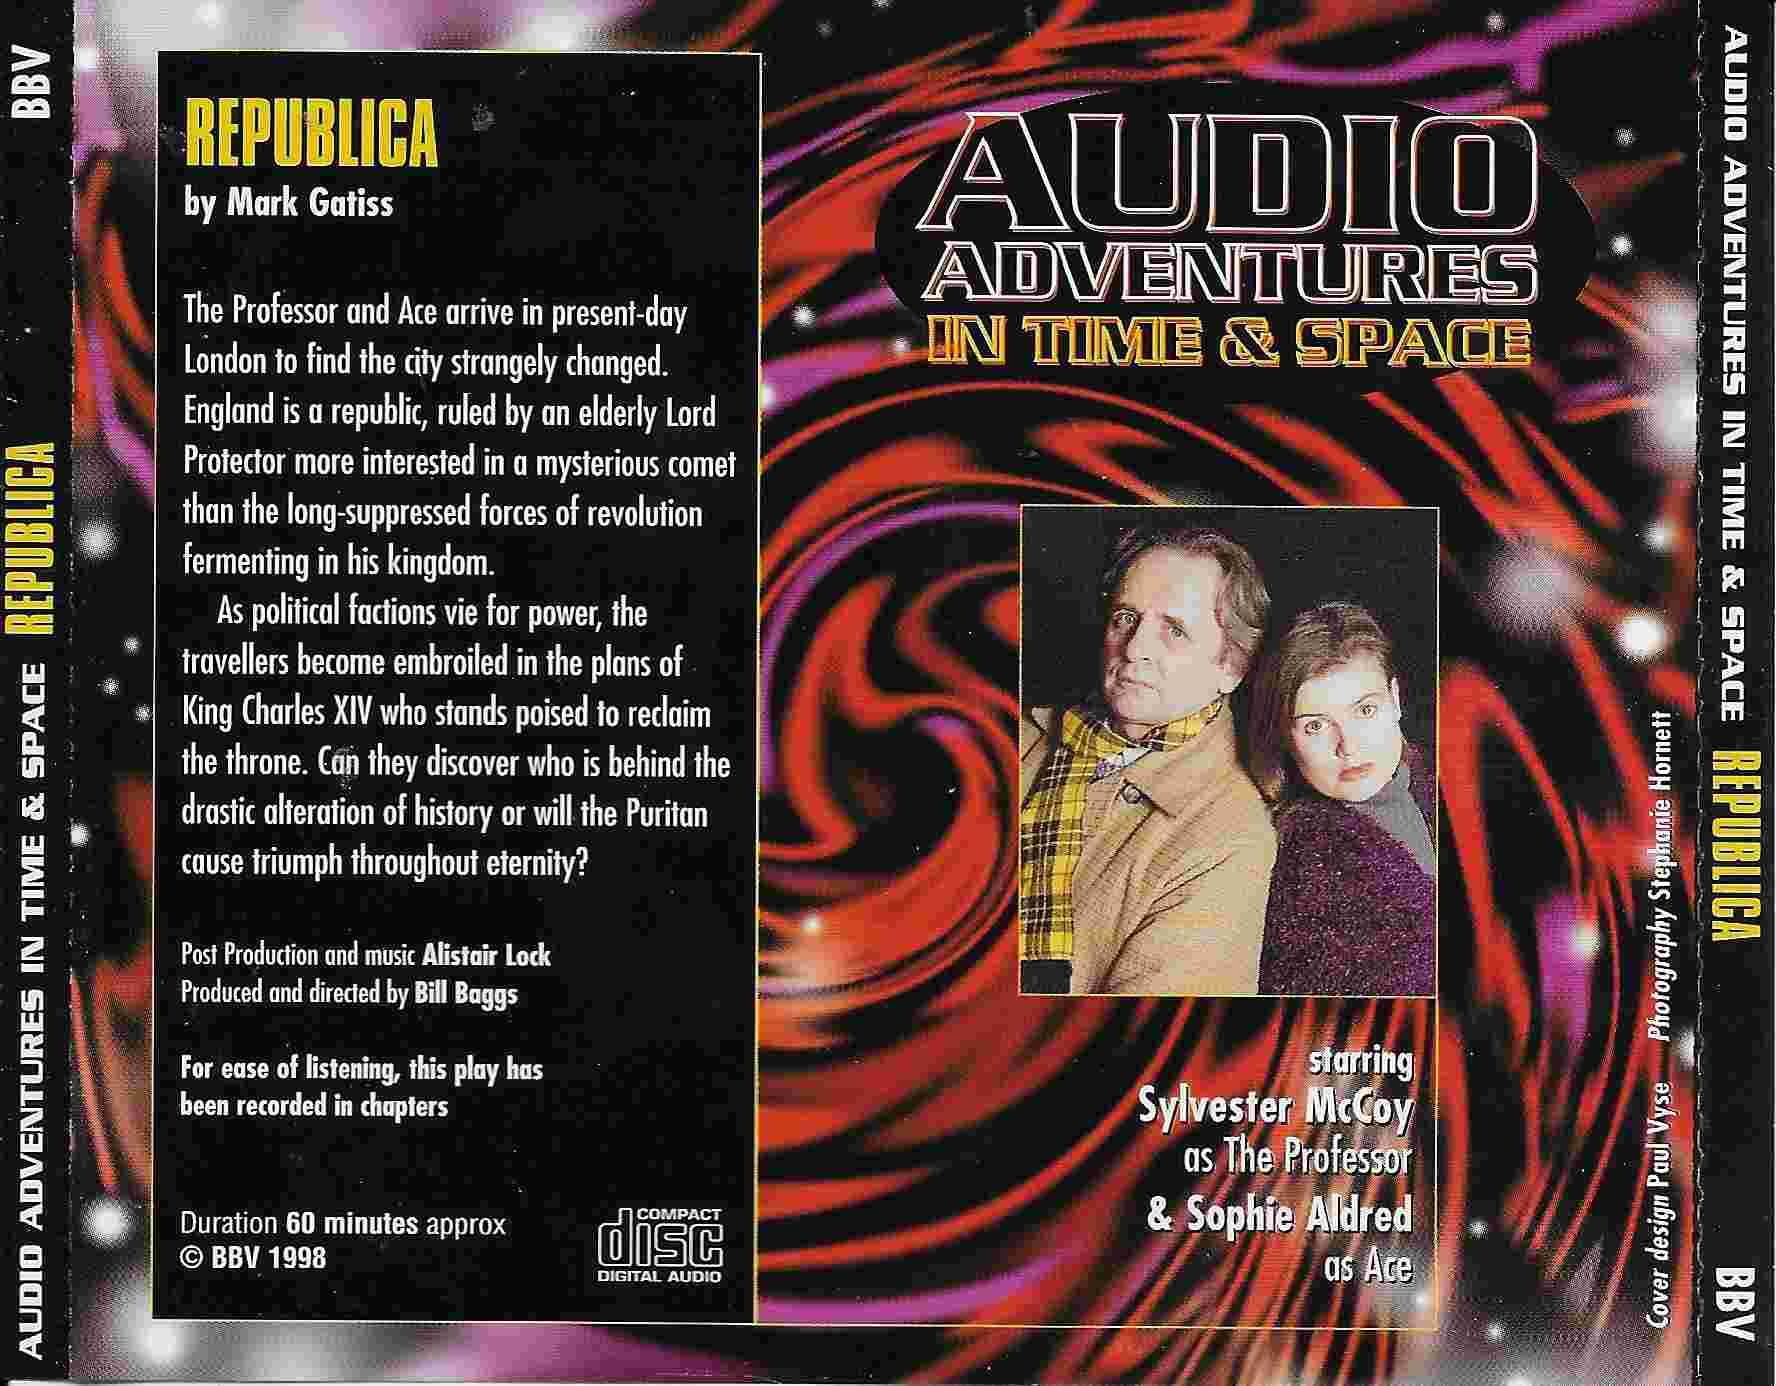 Picture of REPUBLICA The Professor and Ace - Republica by artist Mark Gatiss from the BBC records and Tapes library